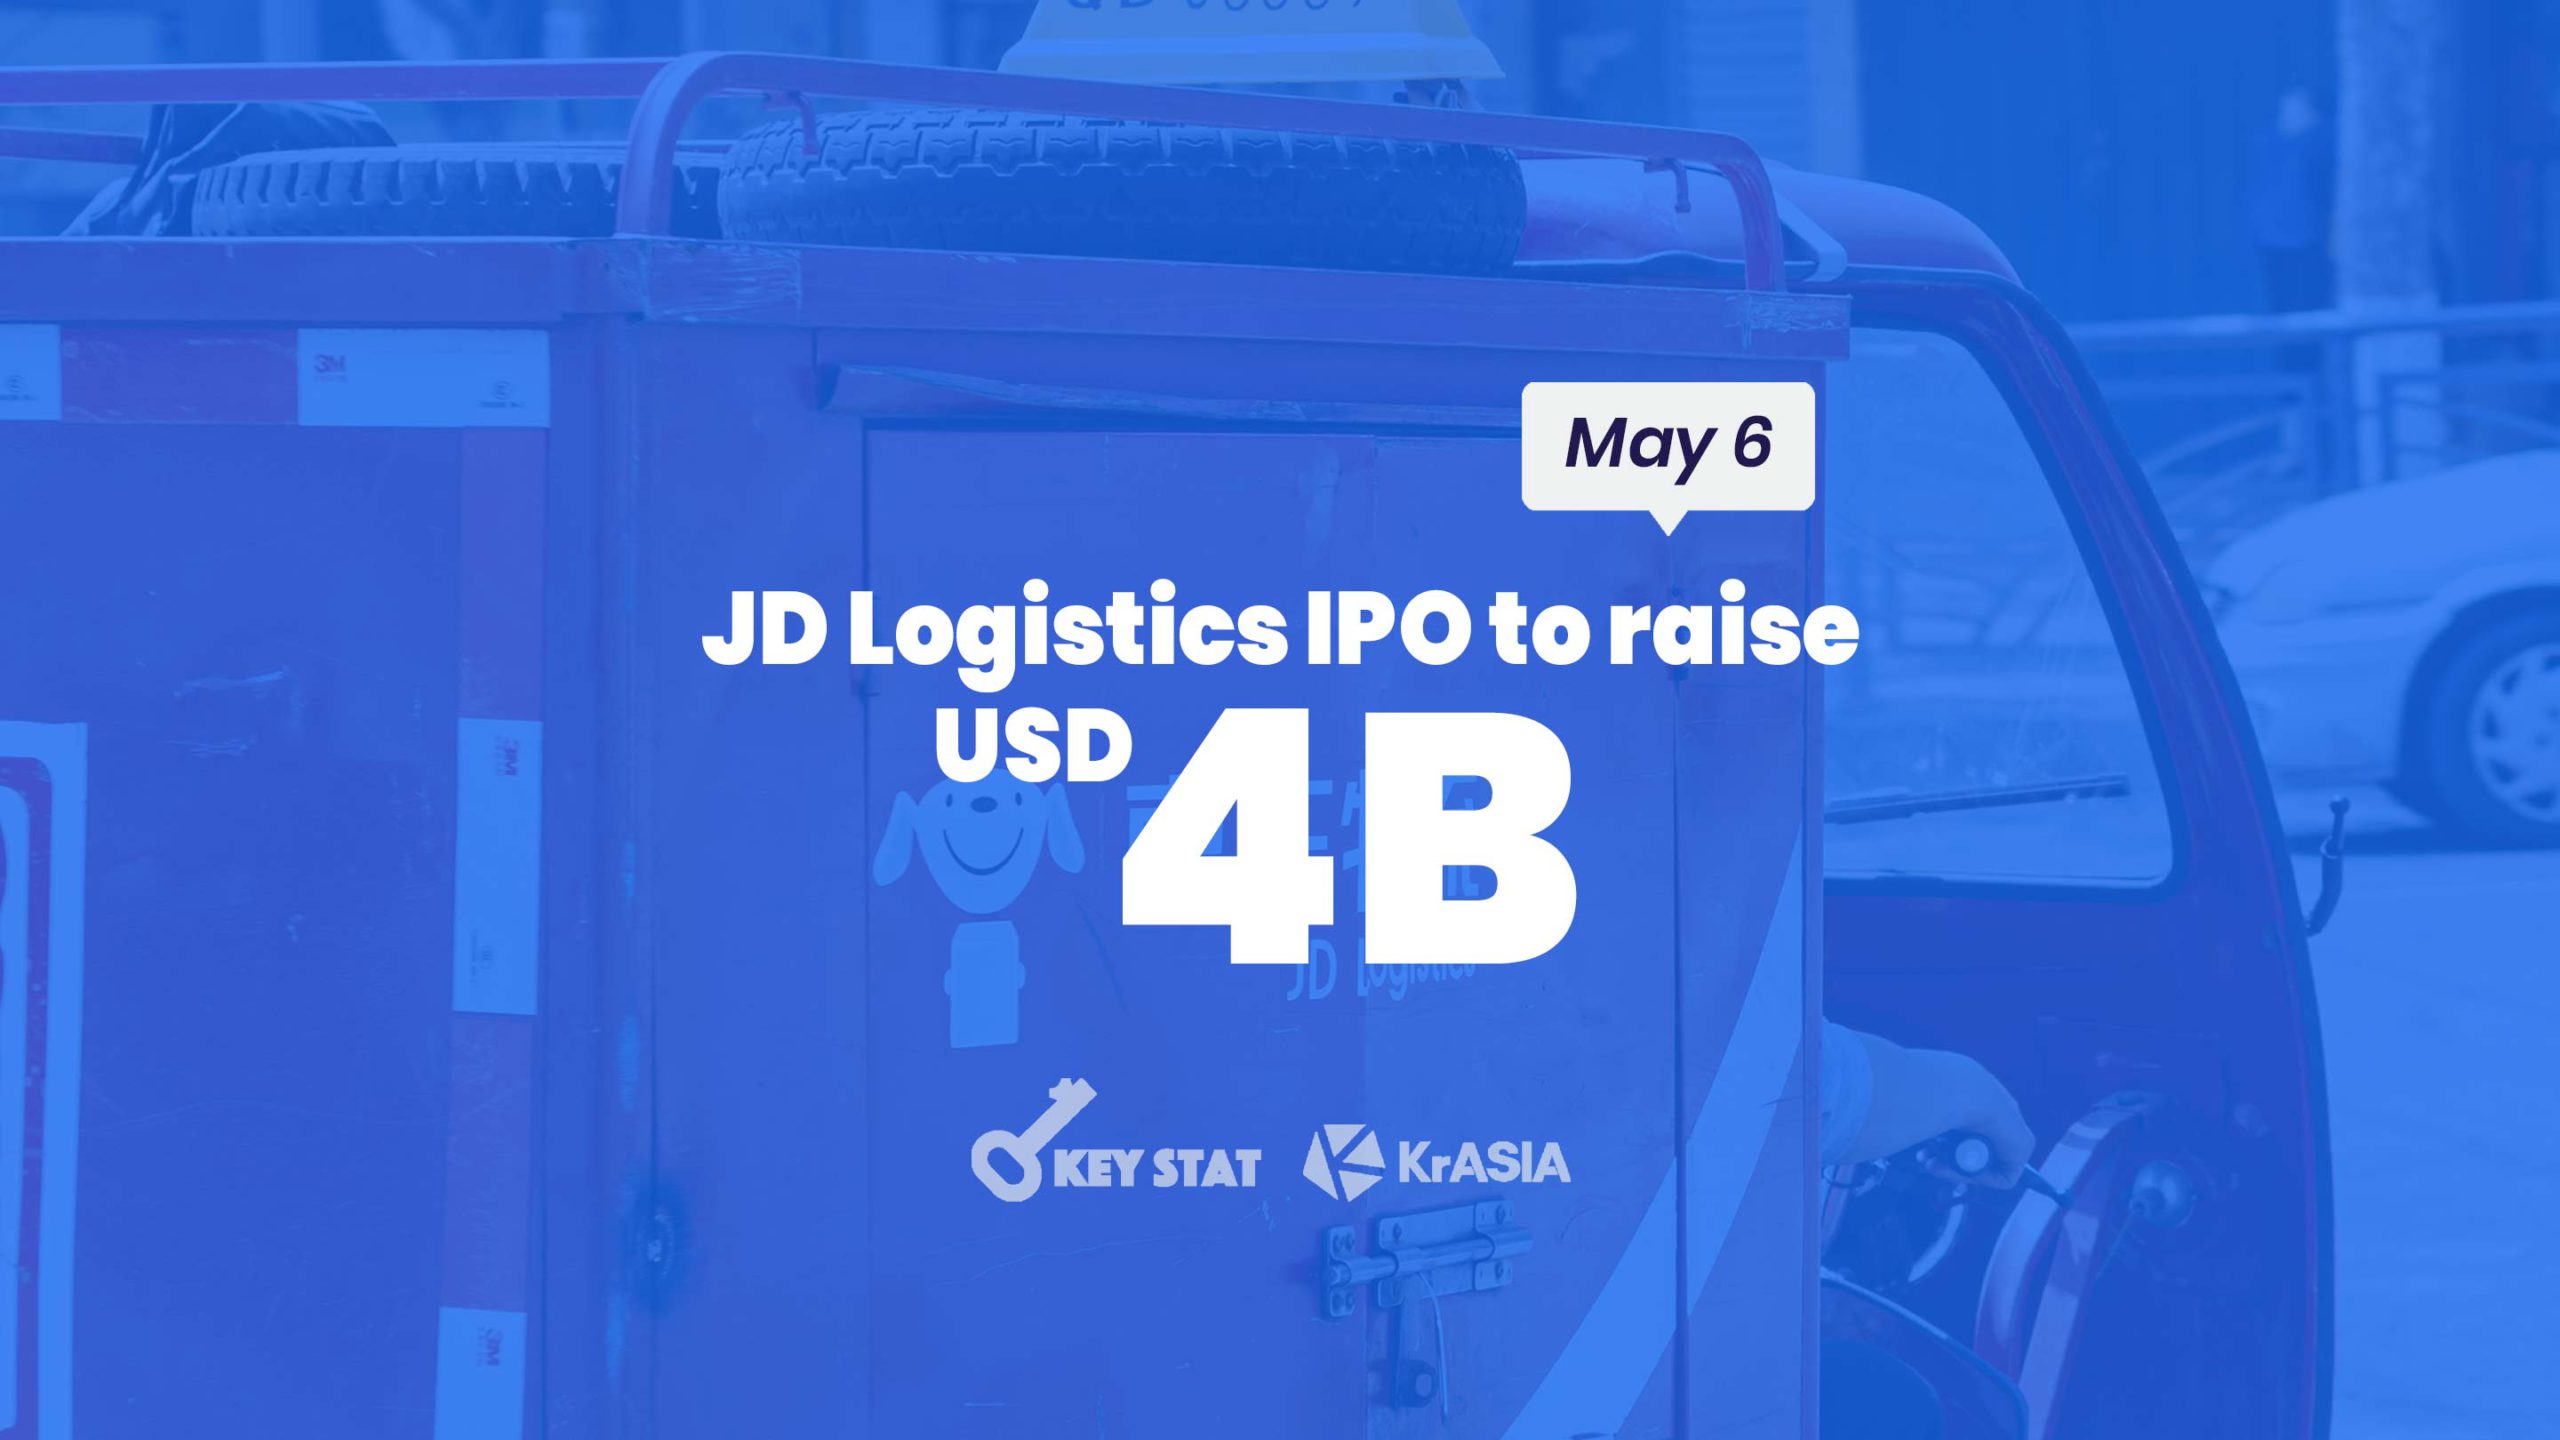 KEY STAT | JD Logistics widens losses, moves ahead with Hong Kong listing